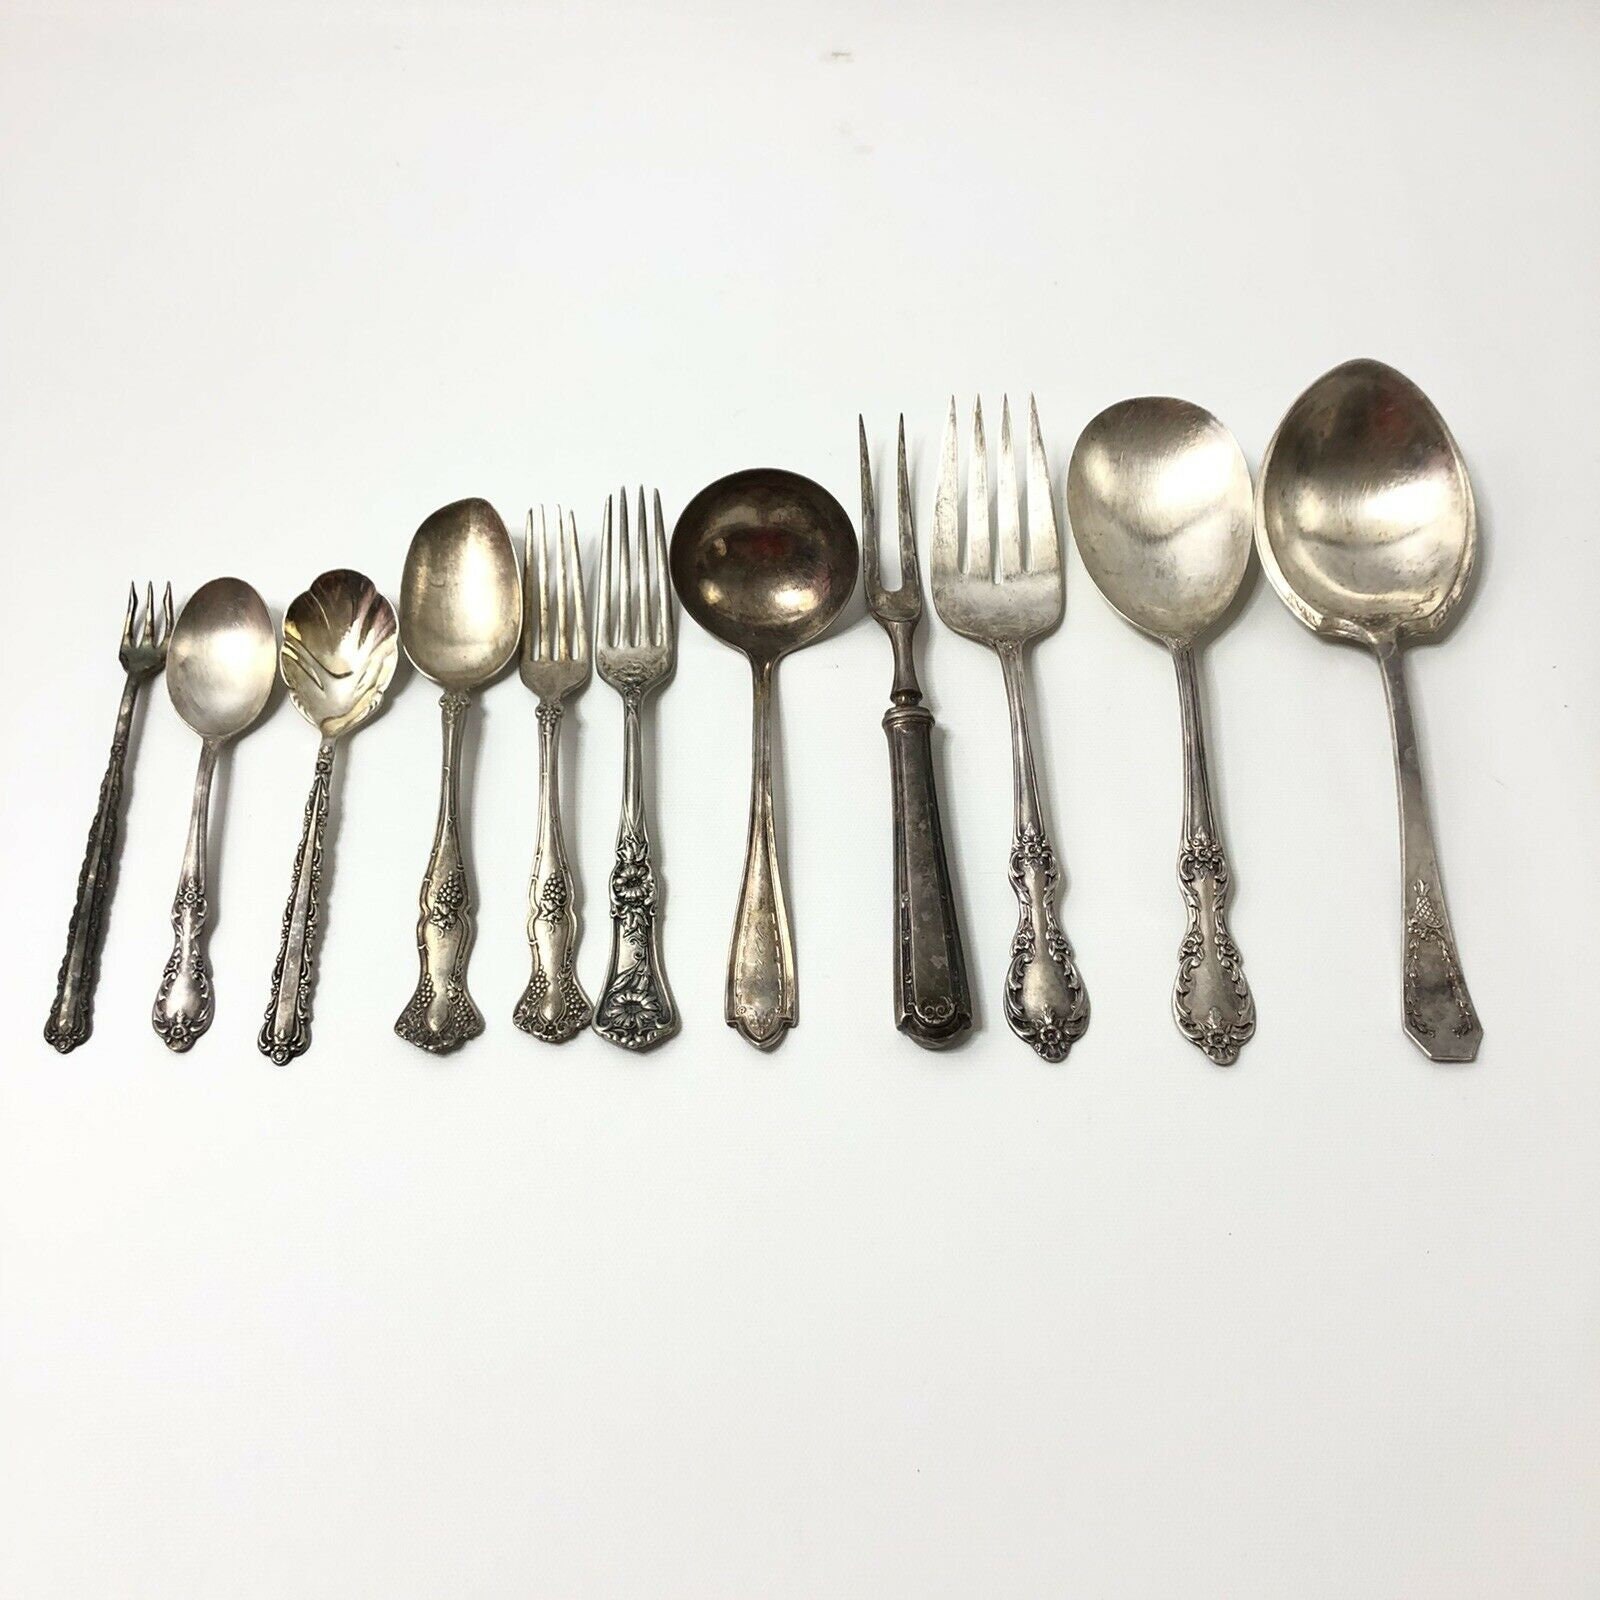 Set Of 11 Vintage Flatware Silverware Serving Pieces Rodgers Homes Edwards